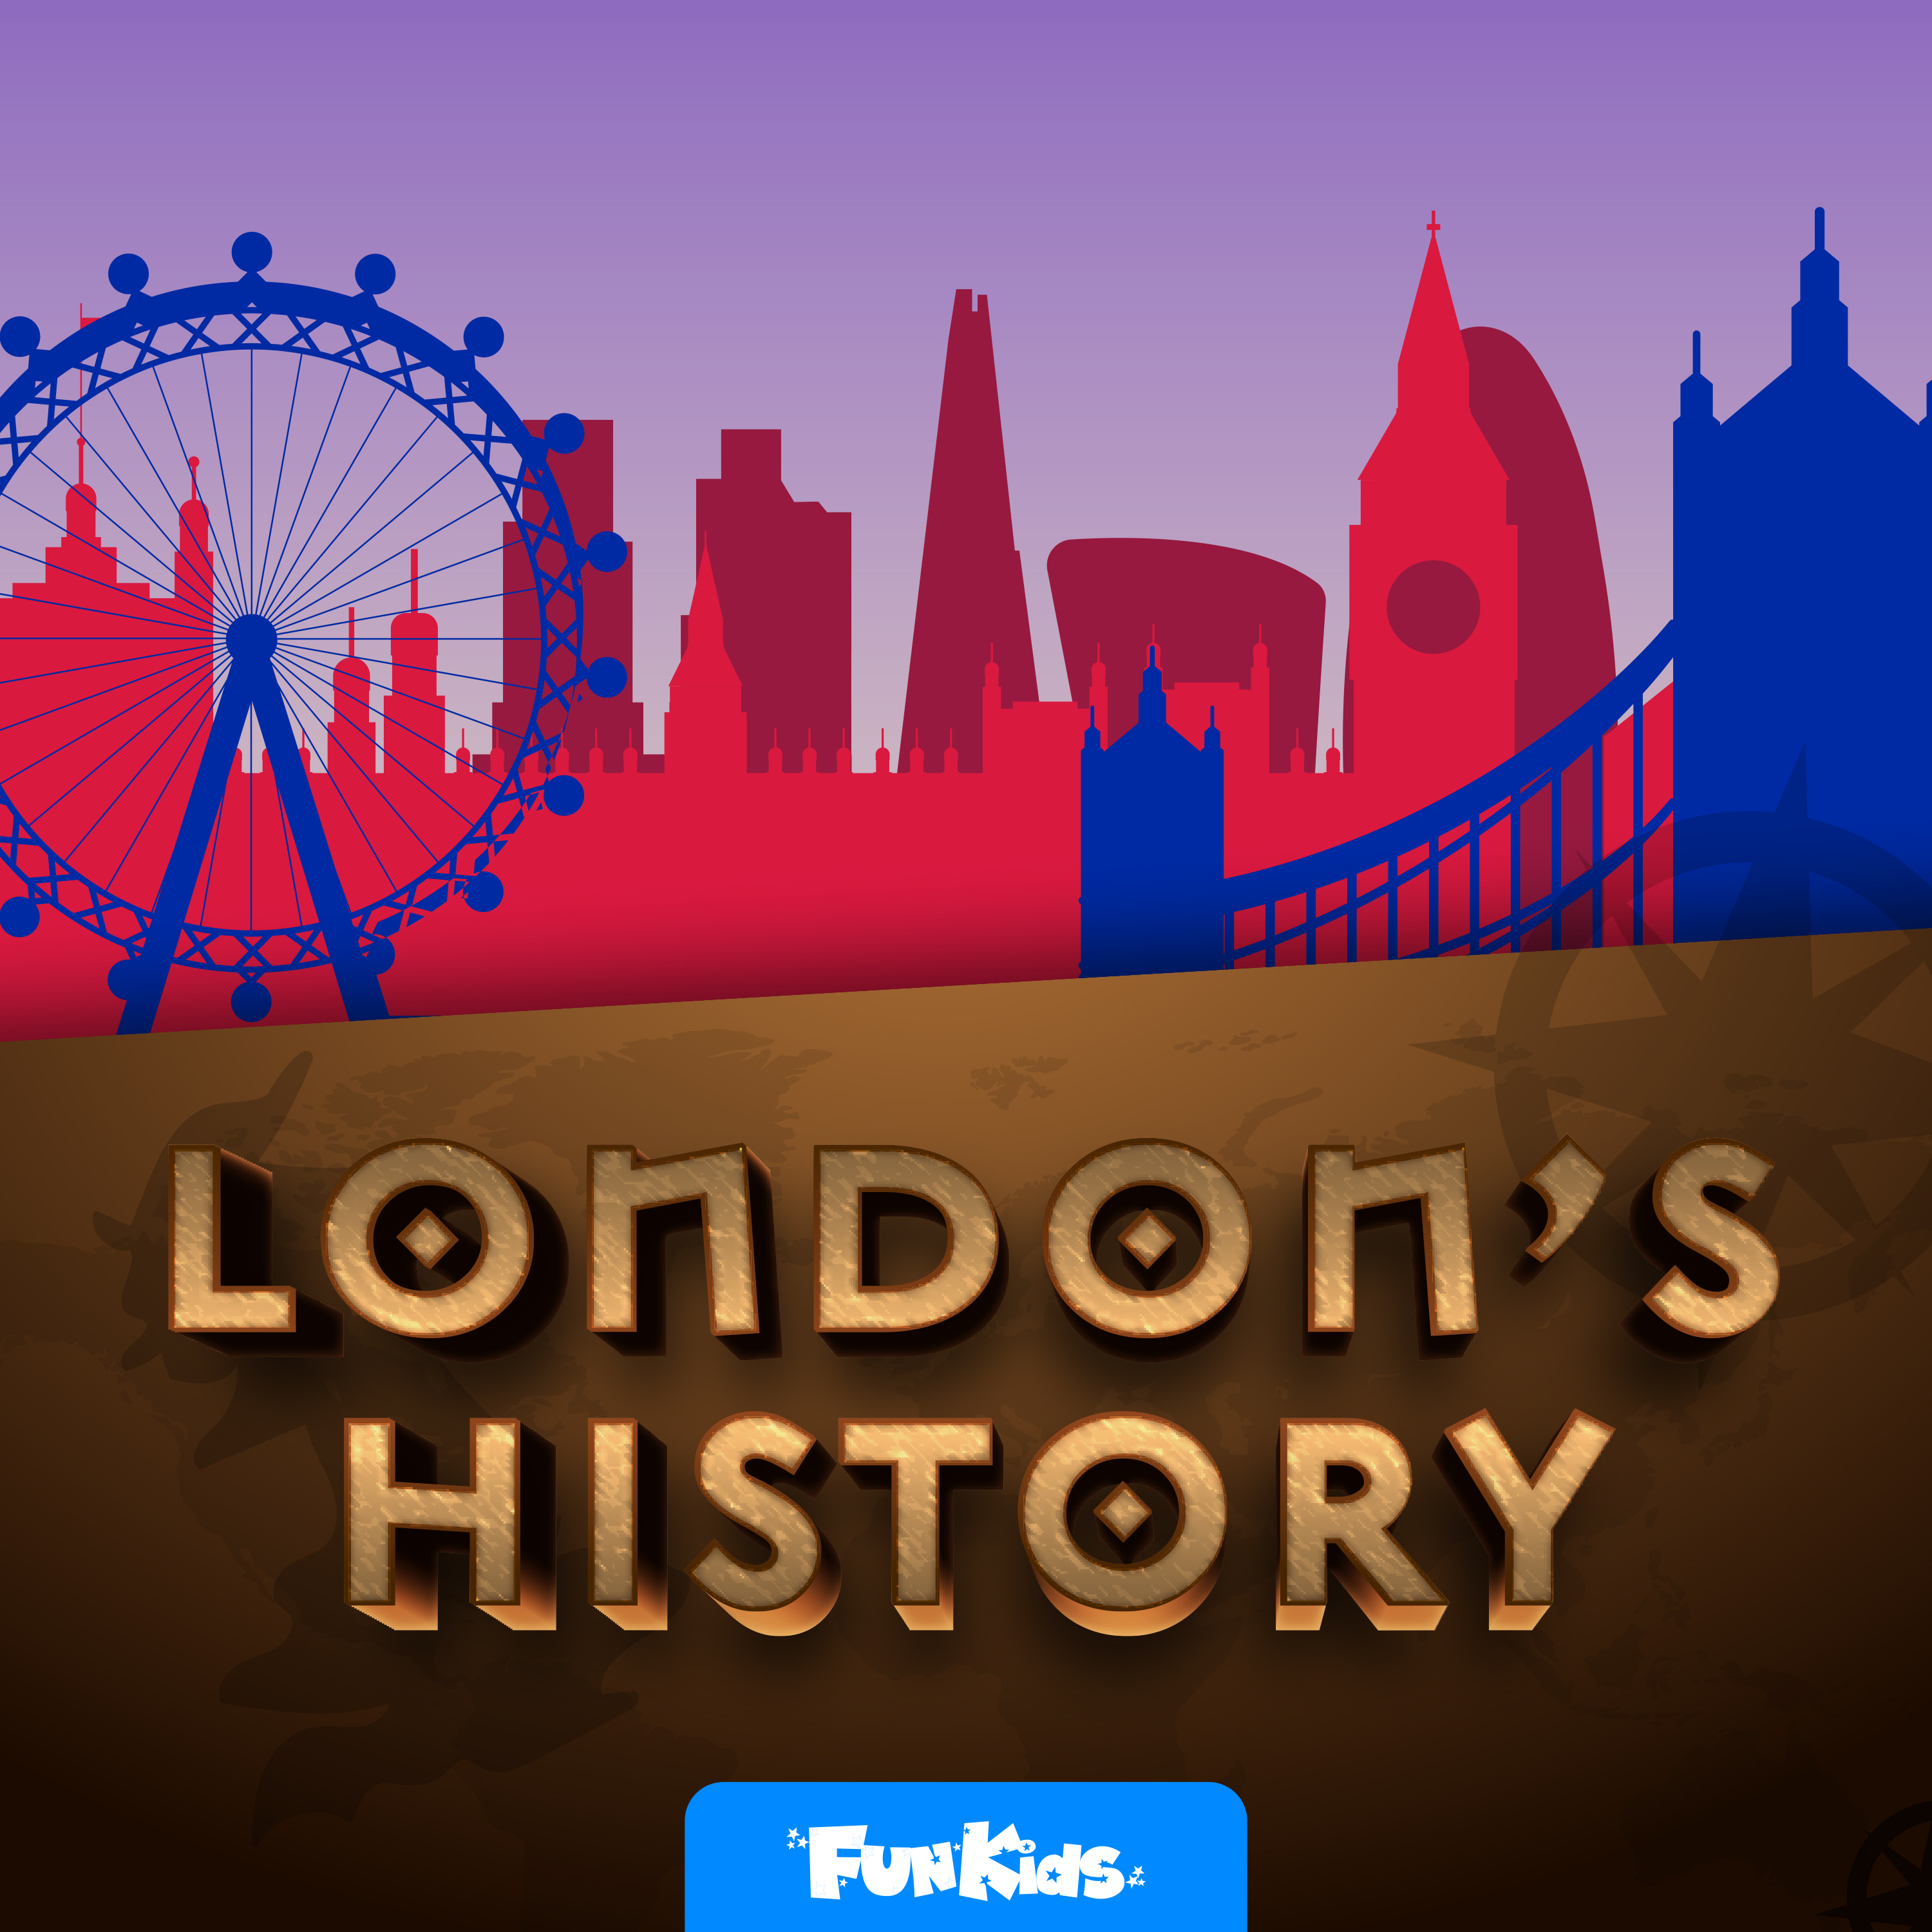 The Medieval City (London's History)